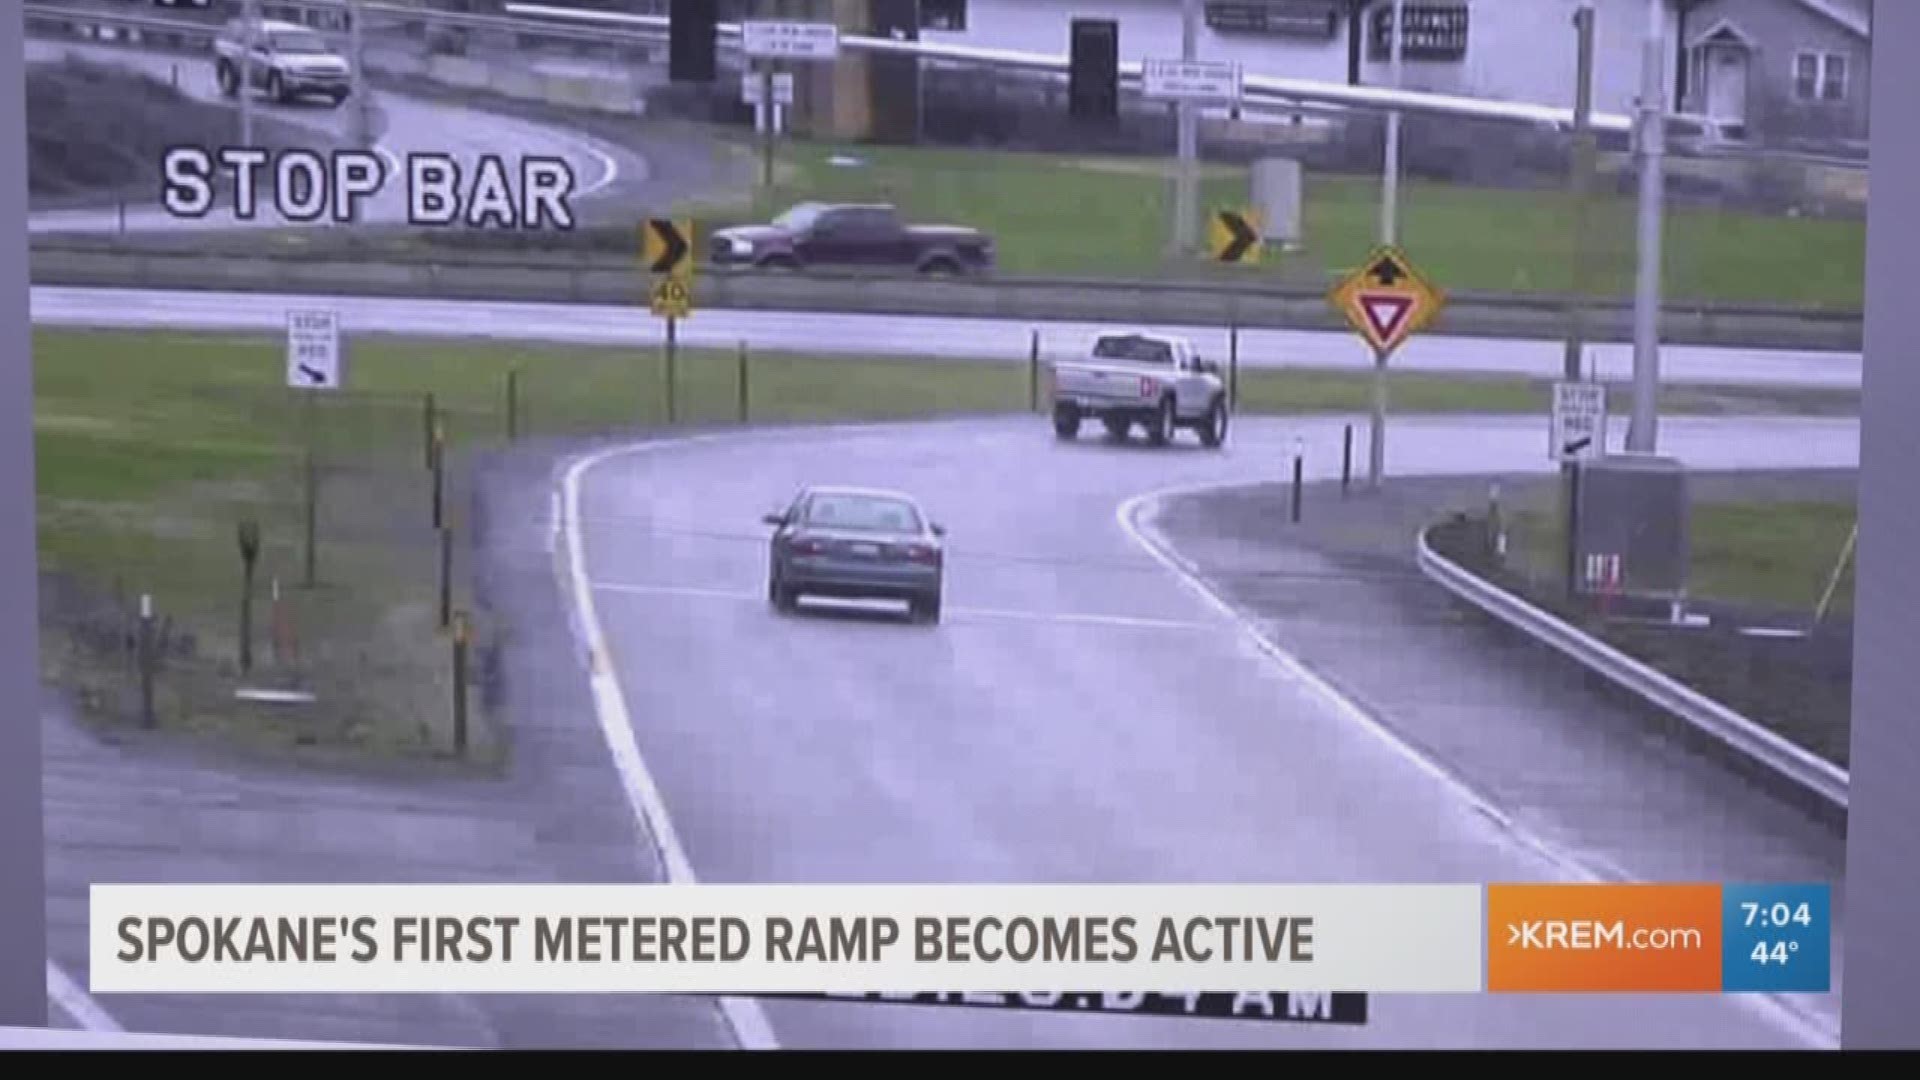 The first metered ramp installed at the Highway 195 and I-90 interchange went live at 6:30 a.m. on Tuesday. KREM reporter Kierra Elfalan explains how it works.